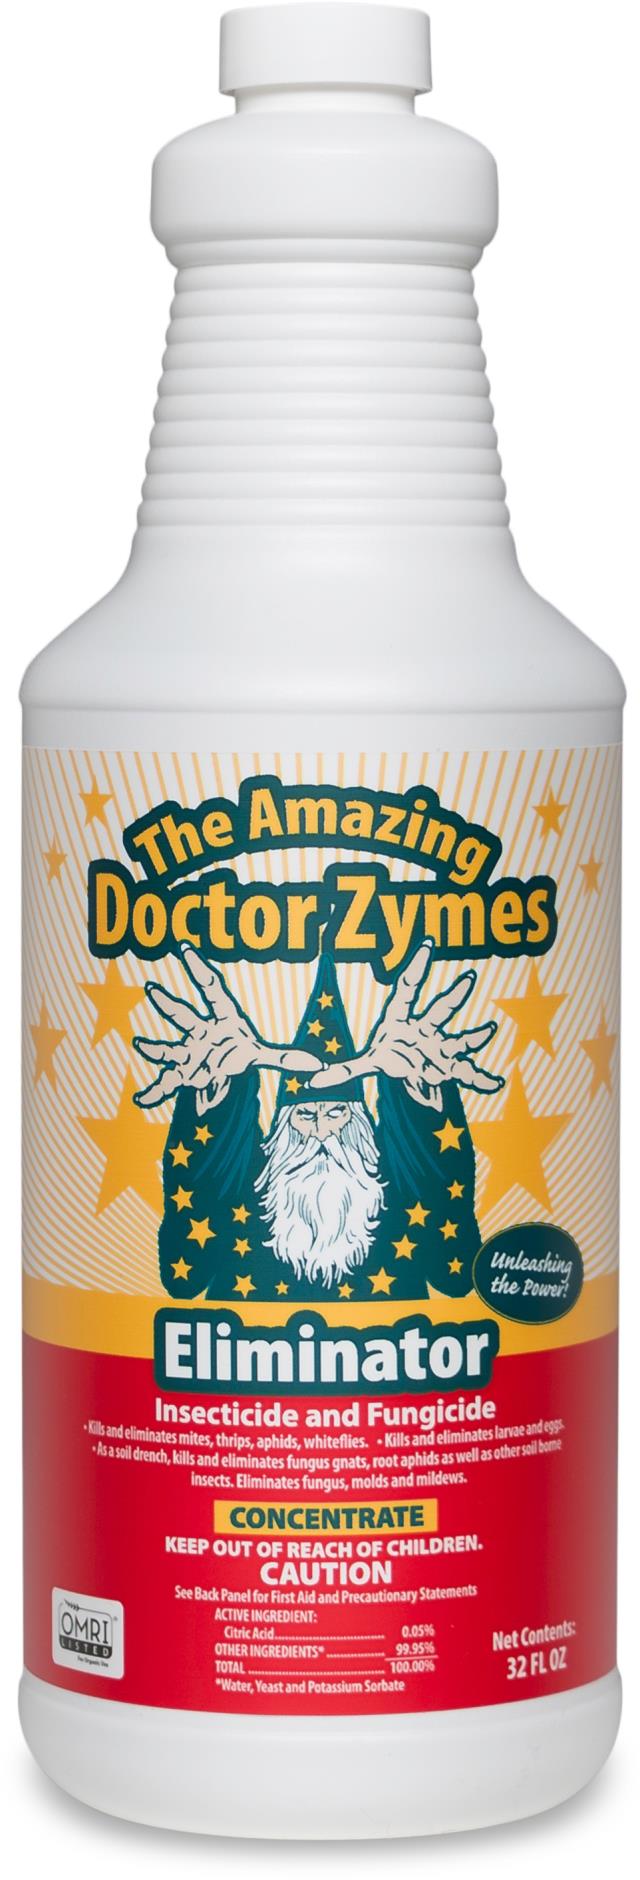 The Amazing Doctor Zymes Eliminator Organic Fungicide & Insecticide